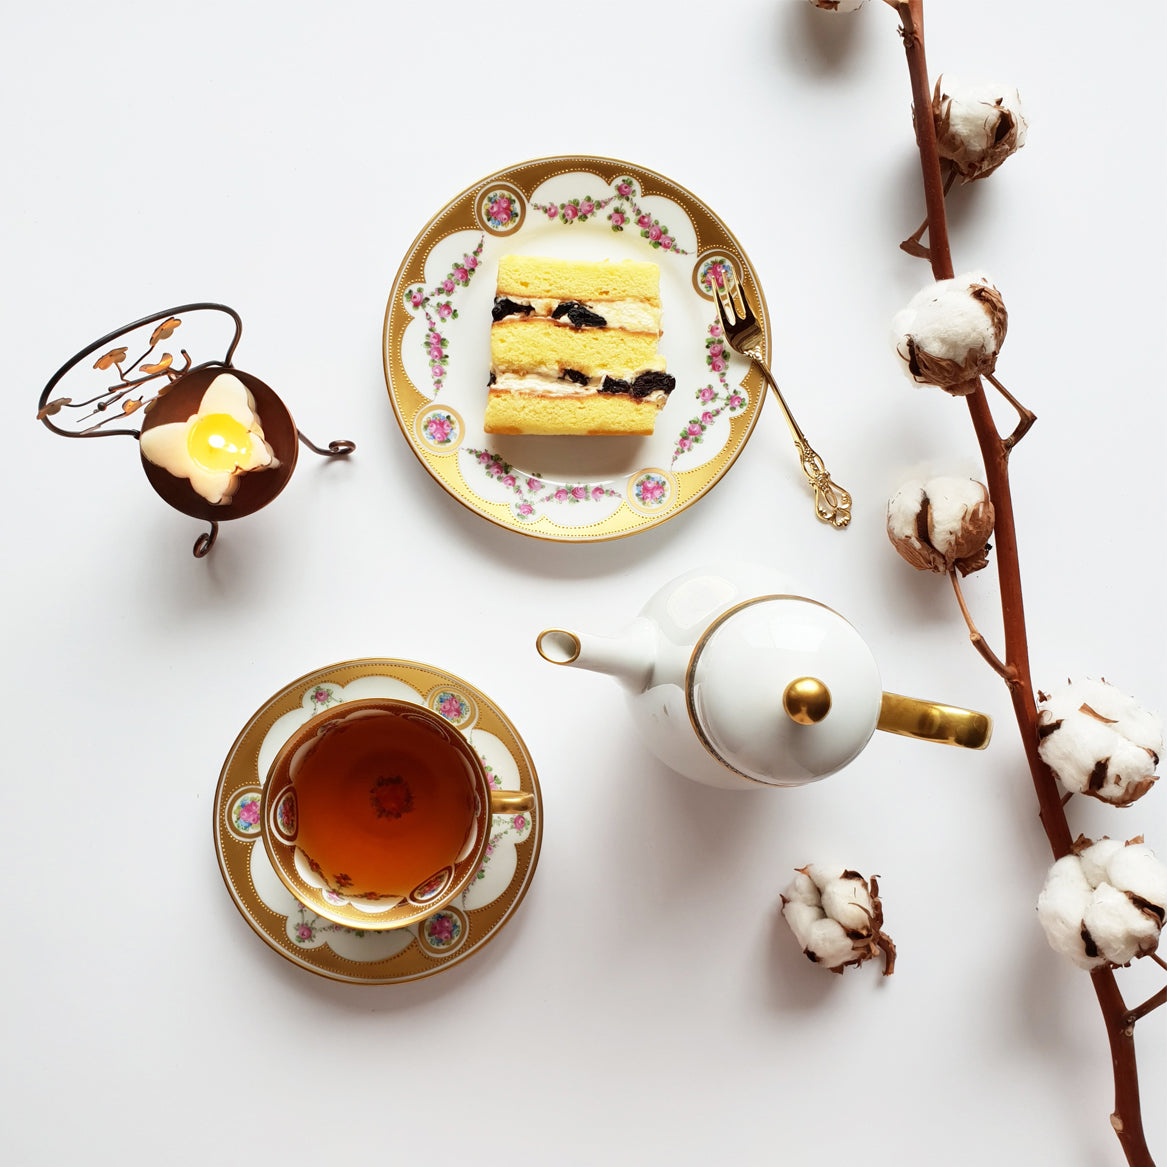 Afternoon Tea: Customs and Etiquette, Now and Then